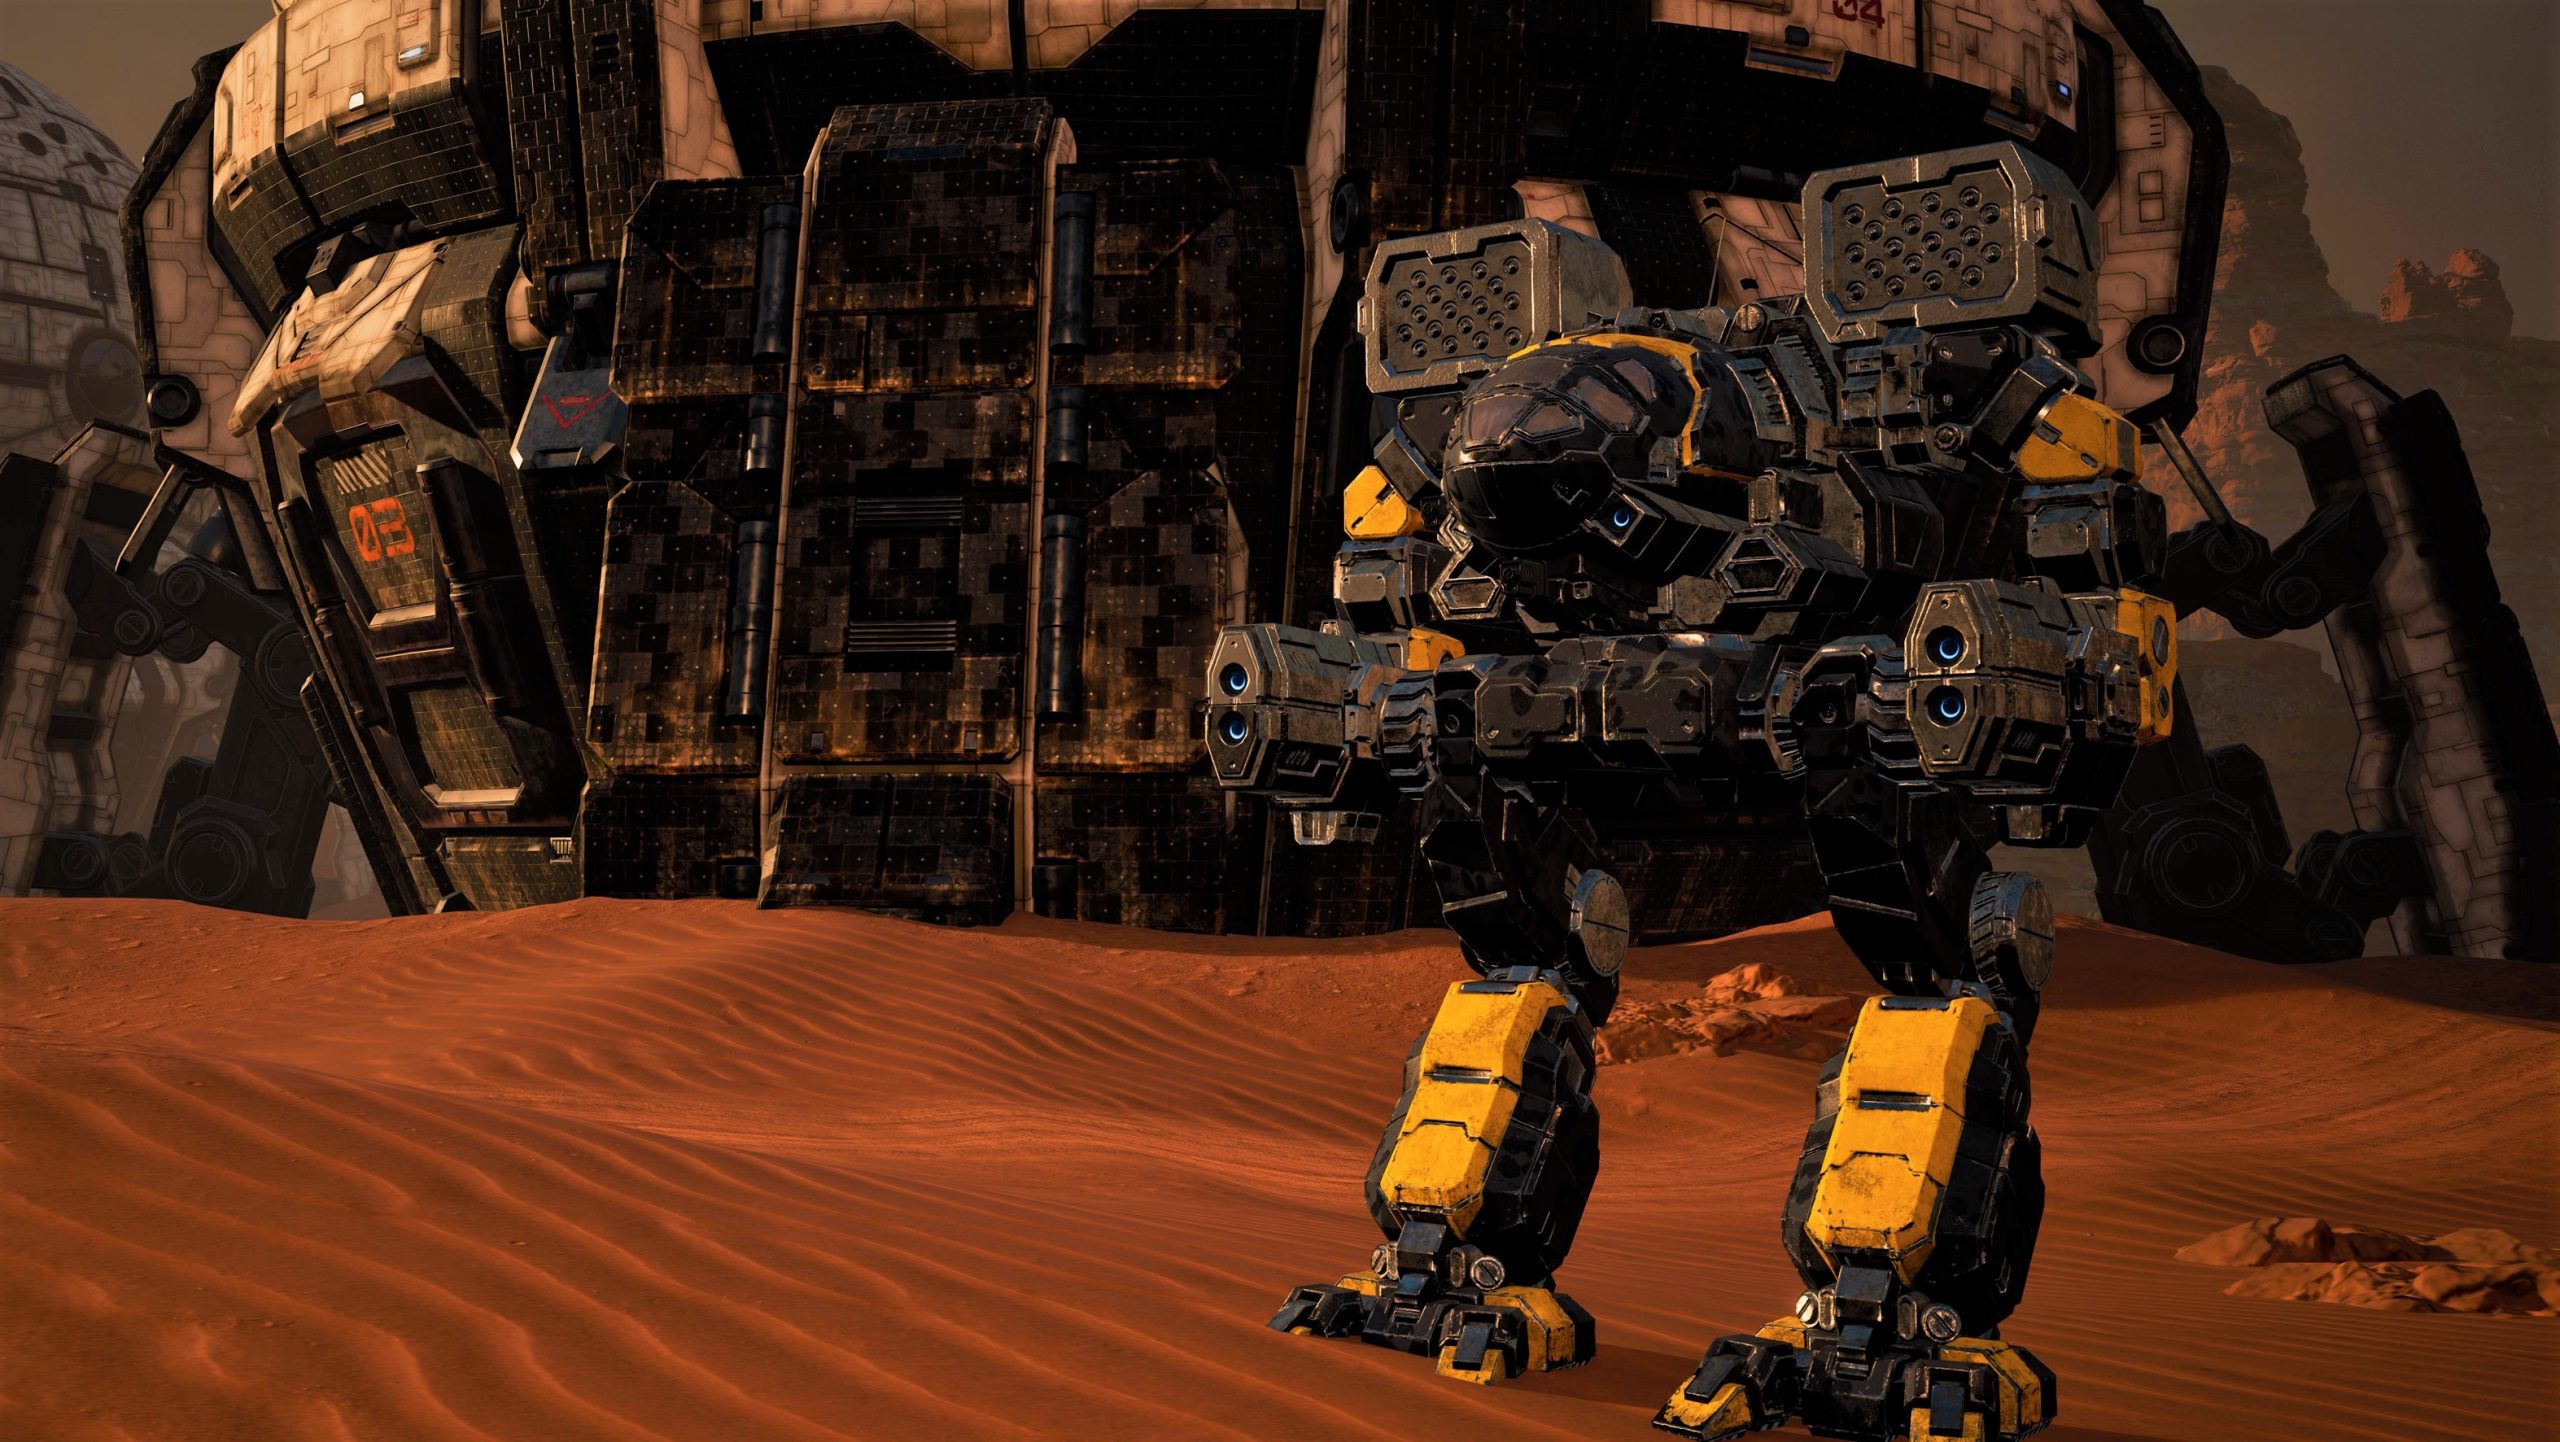 MechWarrior 5: Clans is bringing an RTS-style tactical camera, love for gamepad players, and a new focus on storytelling to the long-running mech sim series